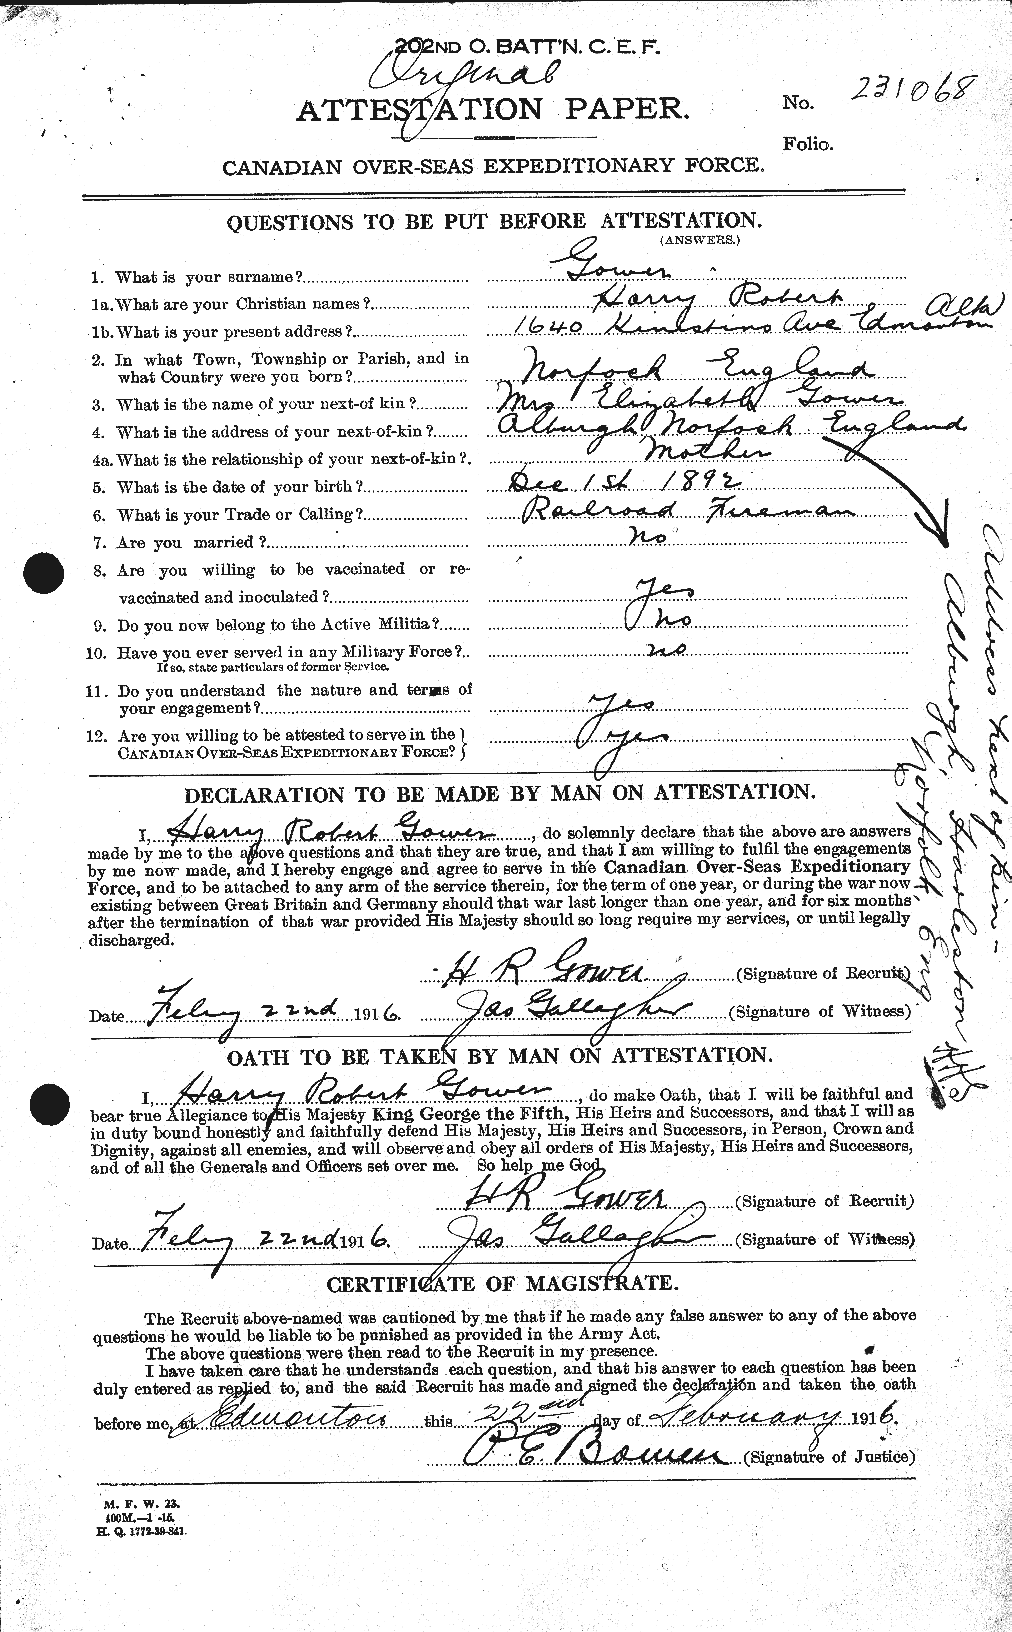 Personnel Records of the First World War - CEF 357212a